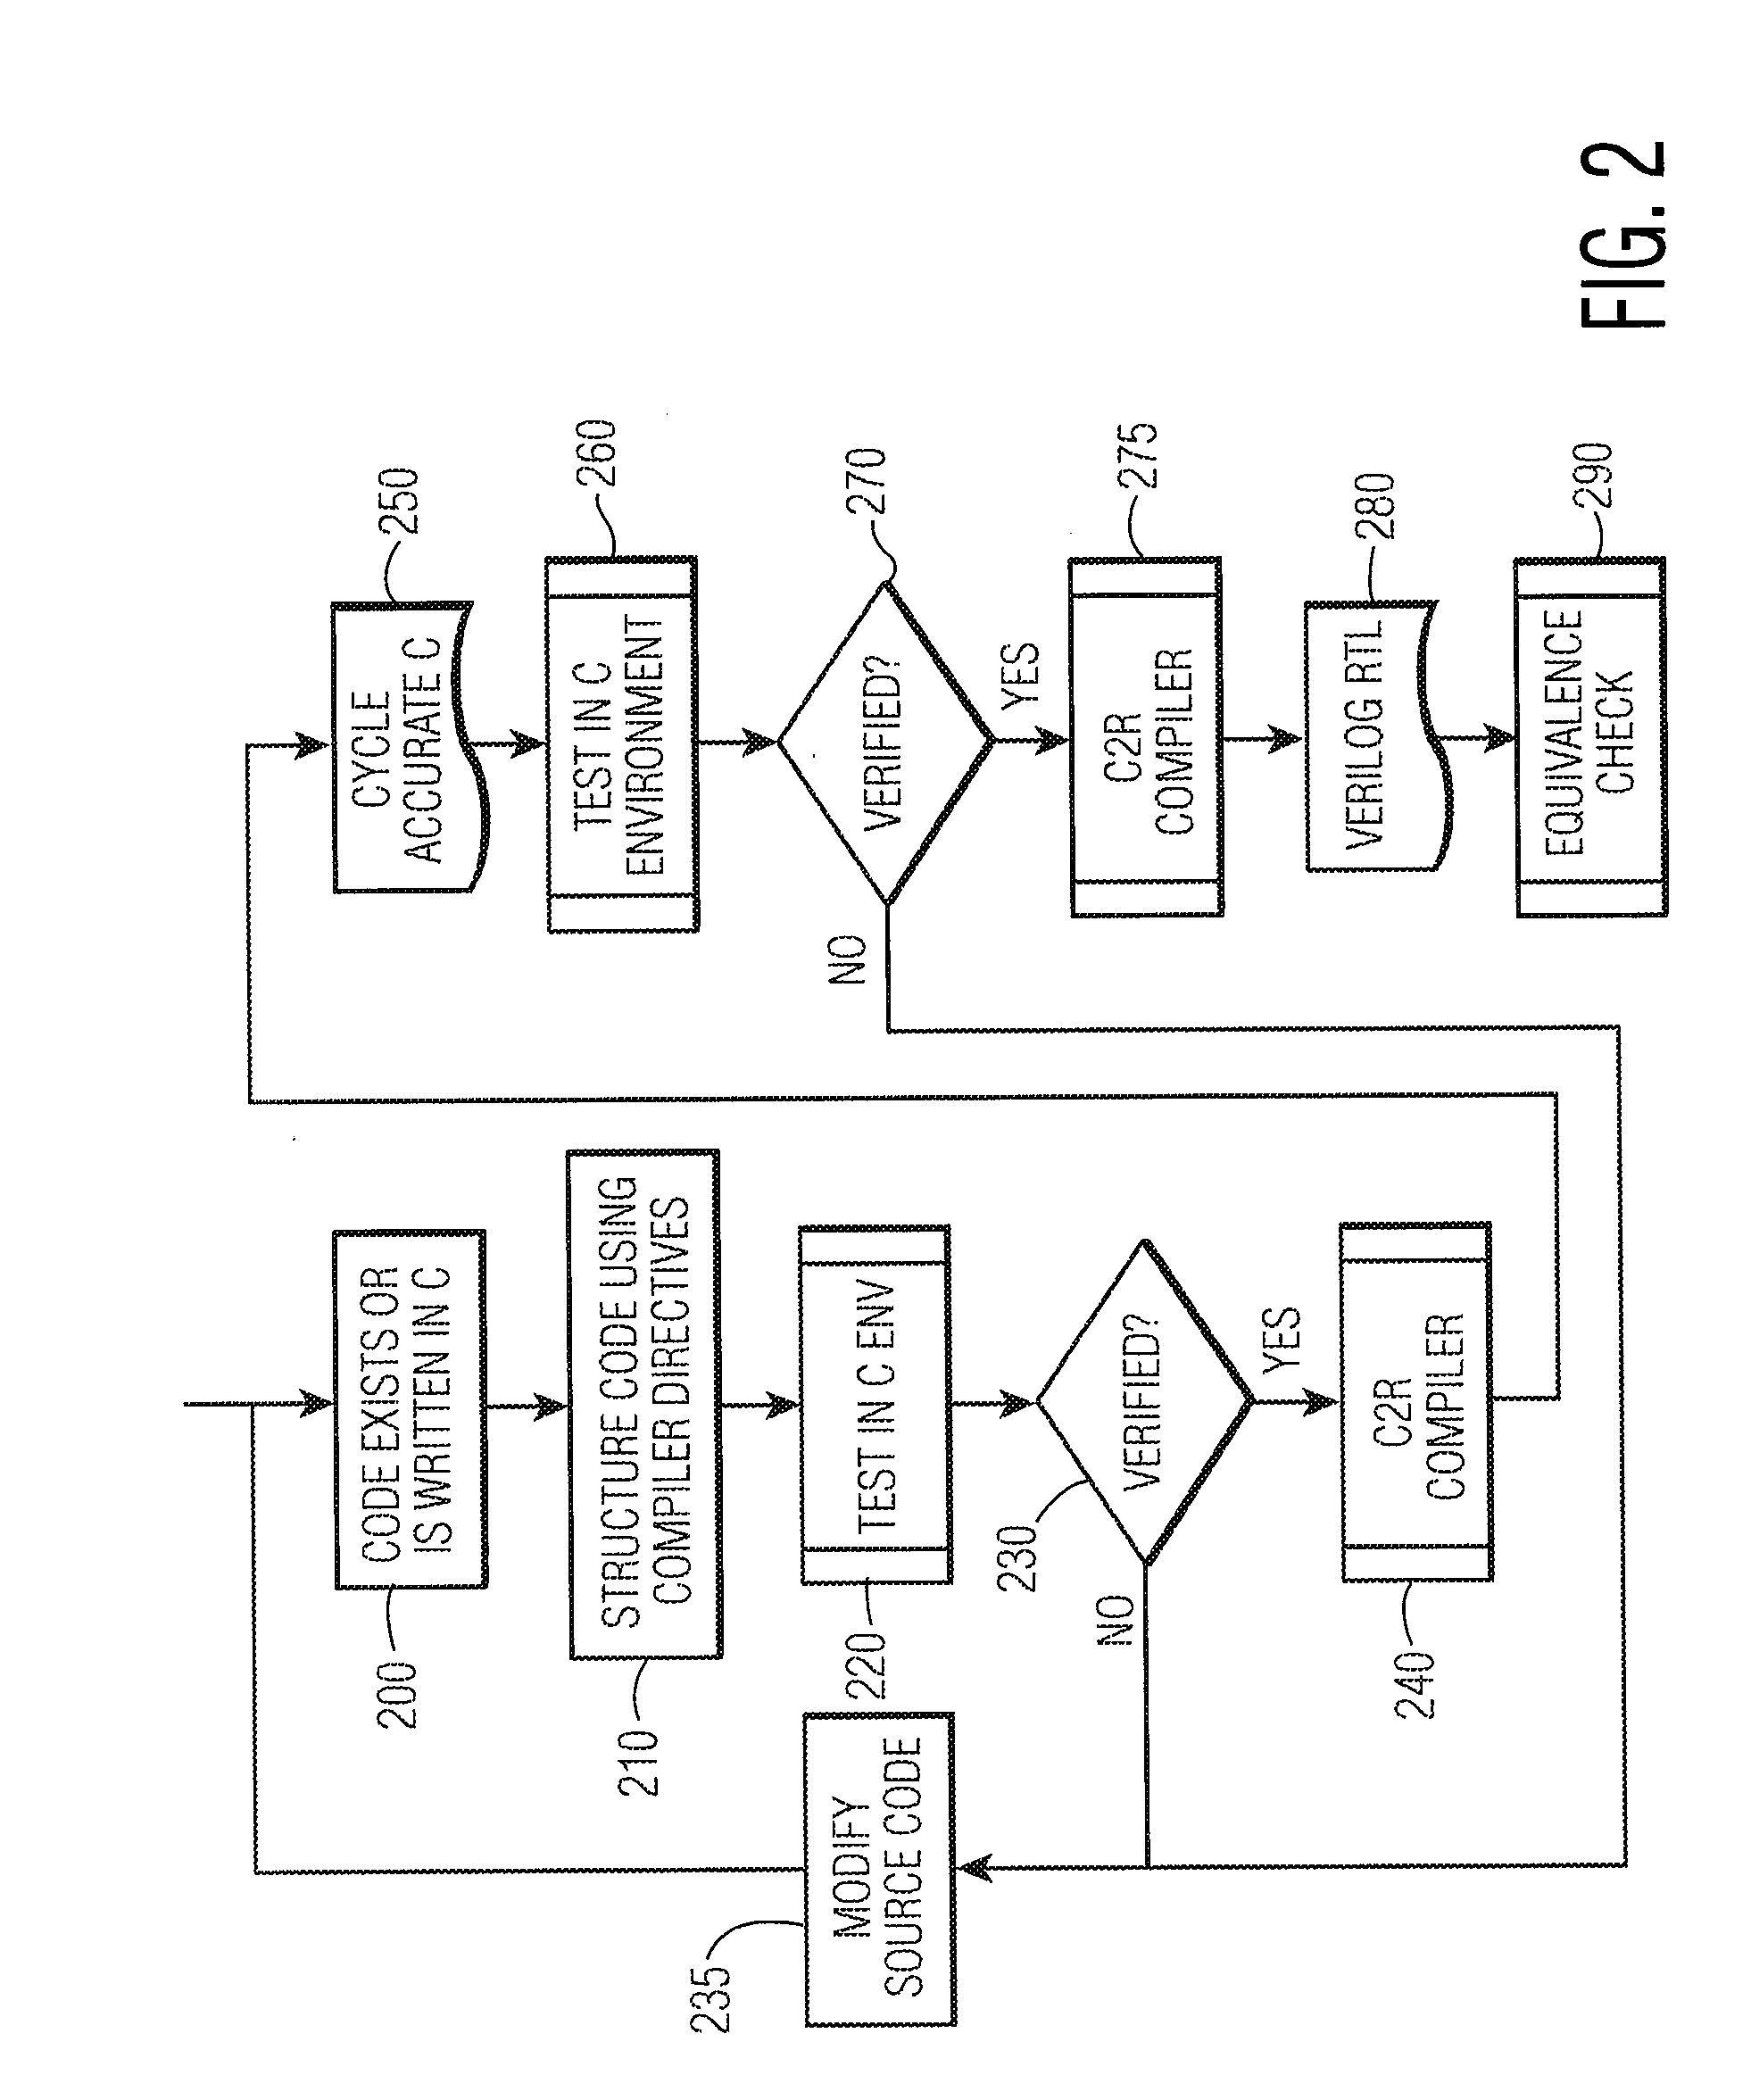 System and method for converting software to a register transfer (RTL) design